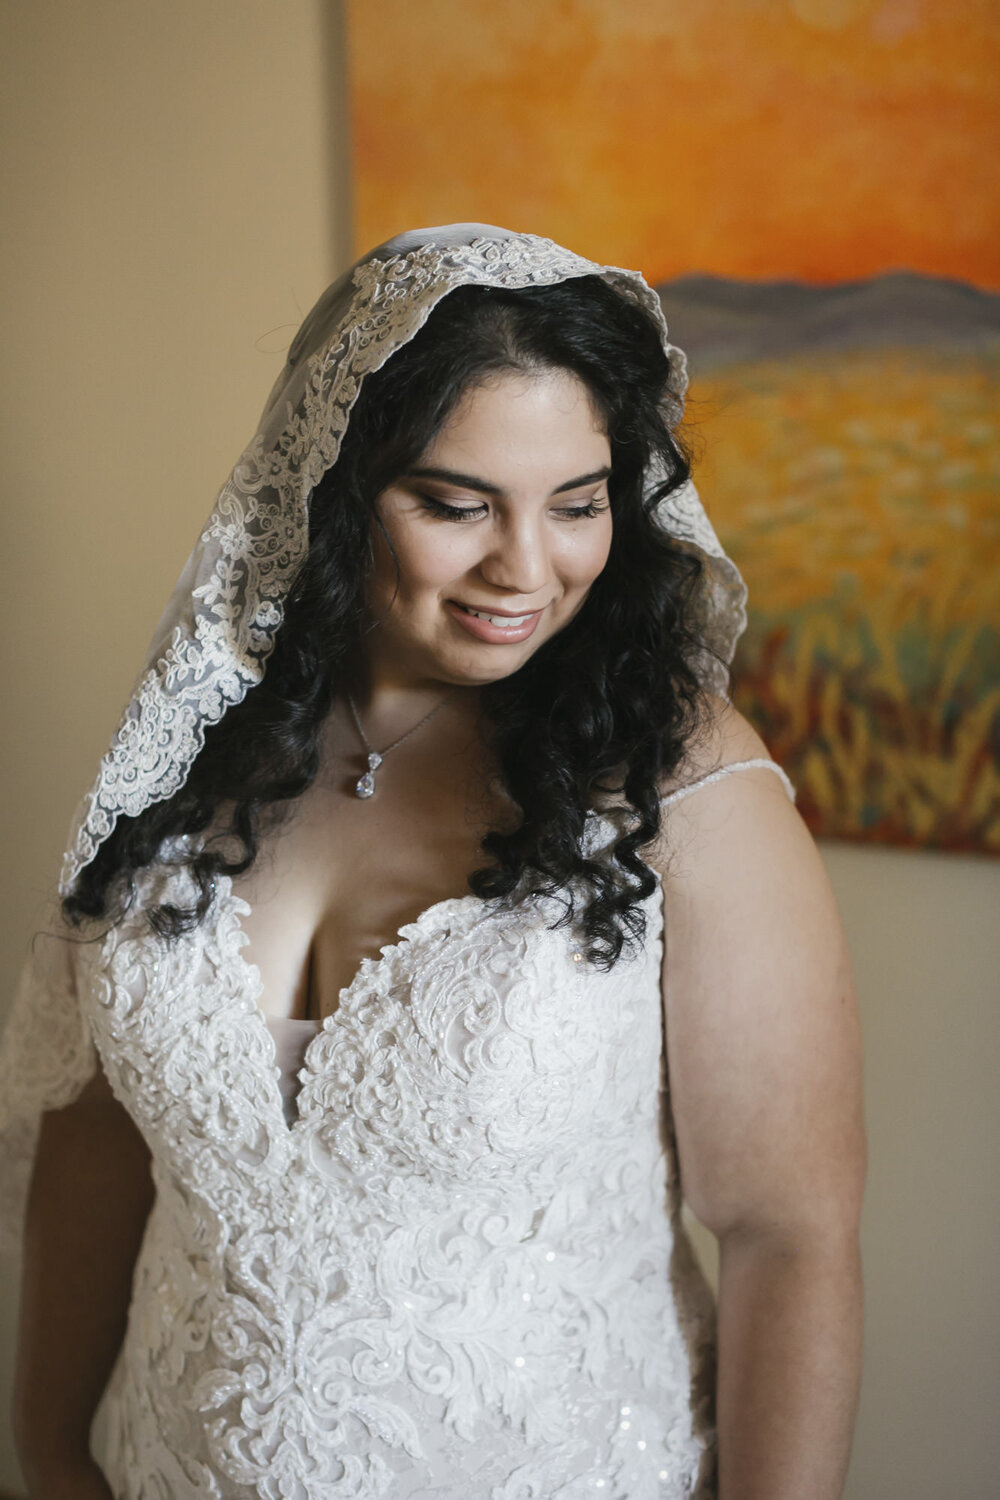 Bride after just putting on her wedding dress and handmade veil for the first time during her forest elopement